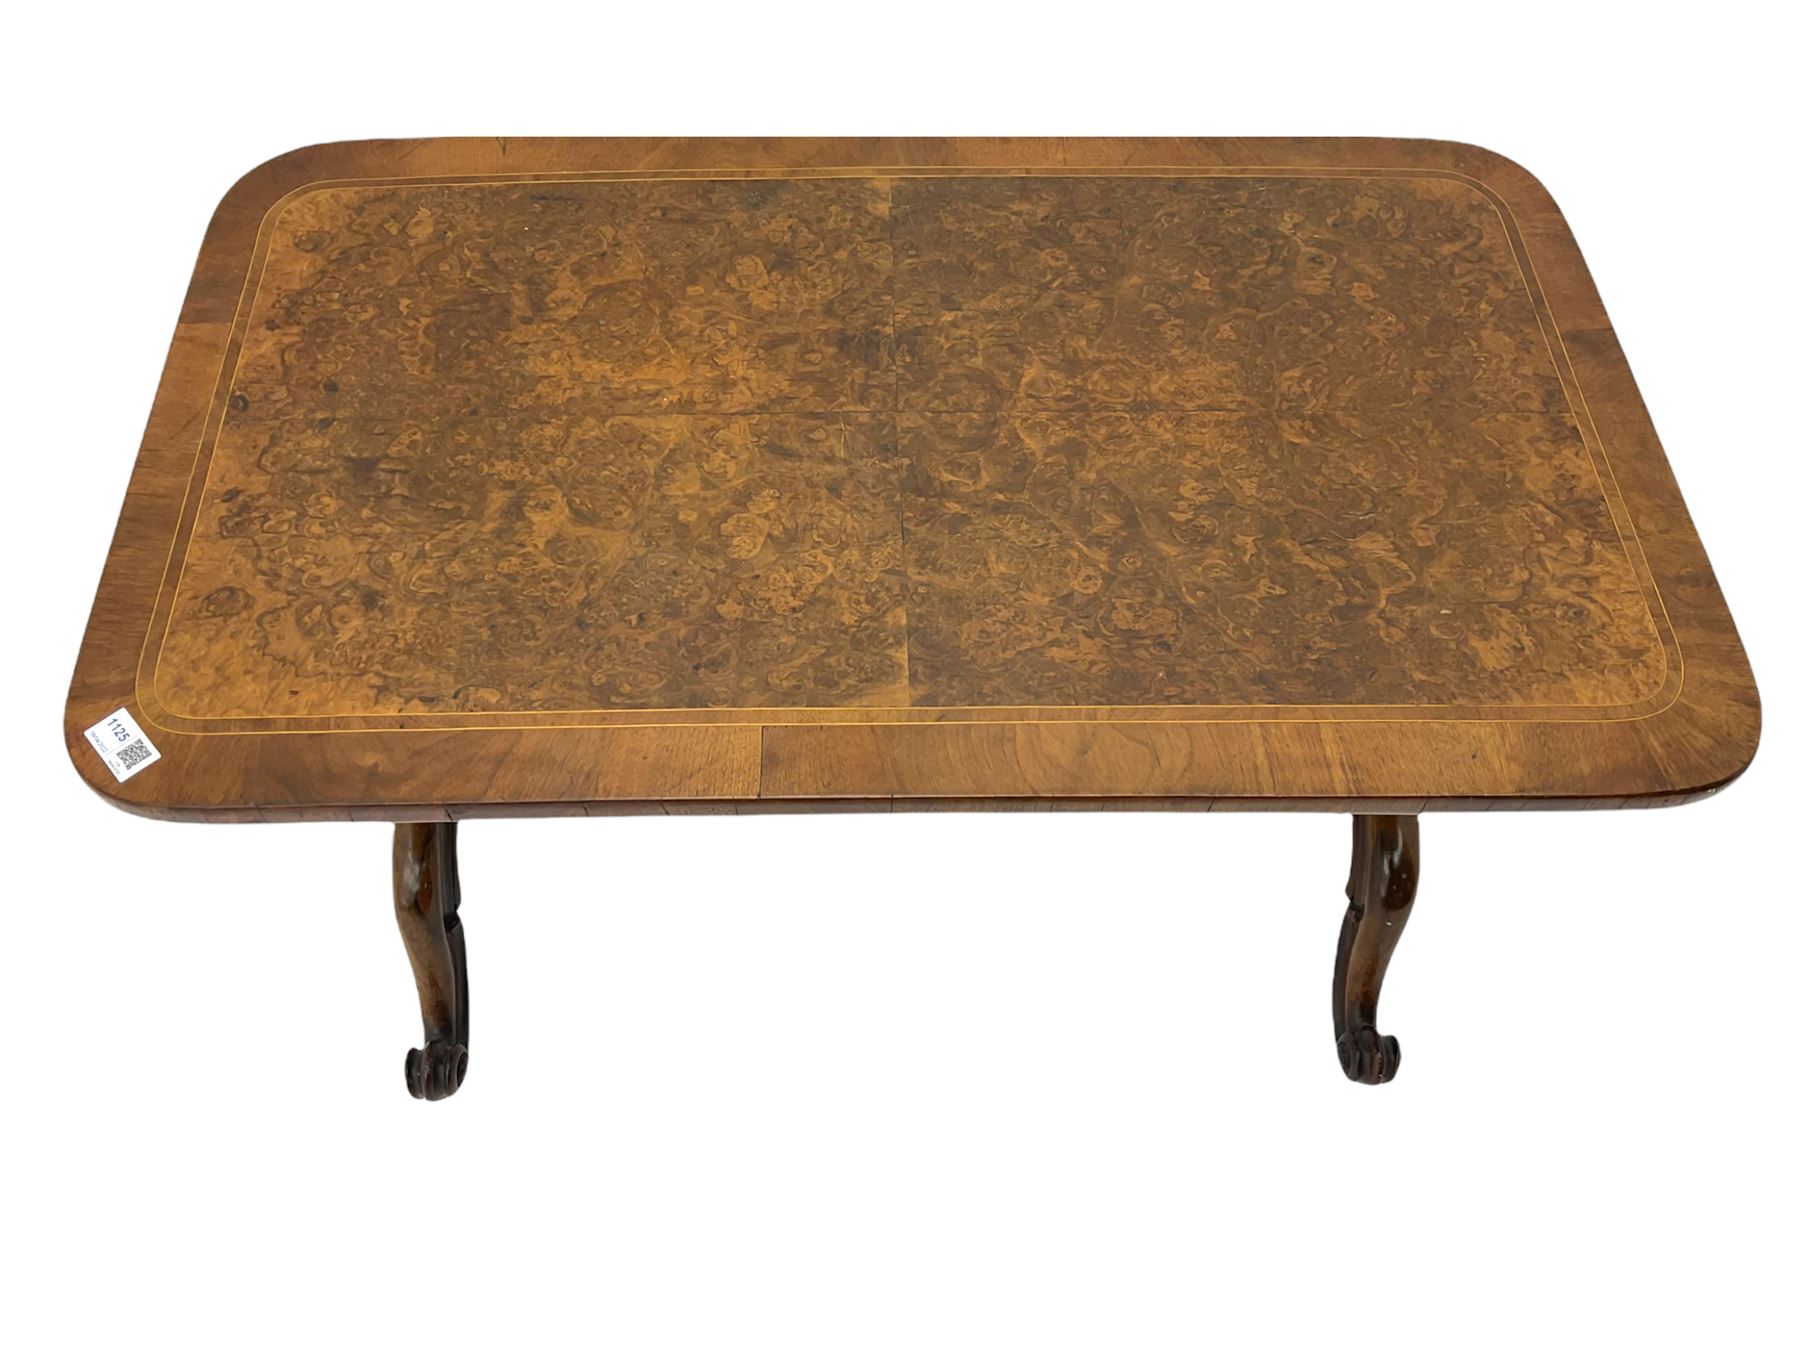 19th century and later stretcher coffee table - Image 2 of 6